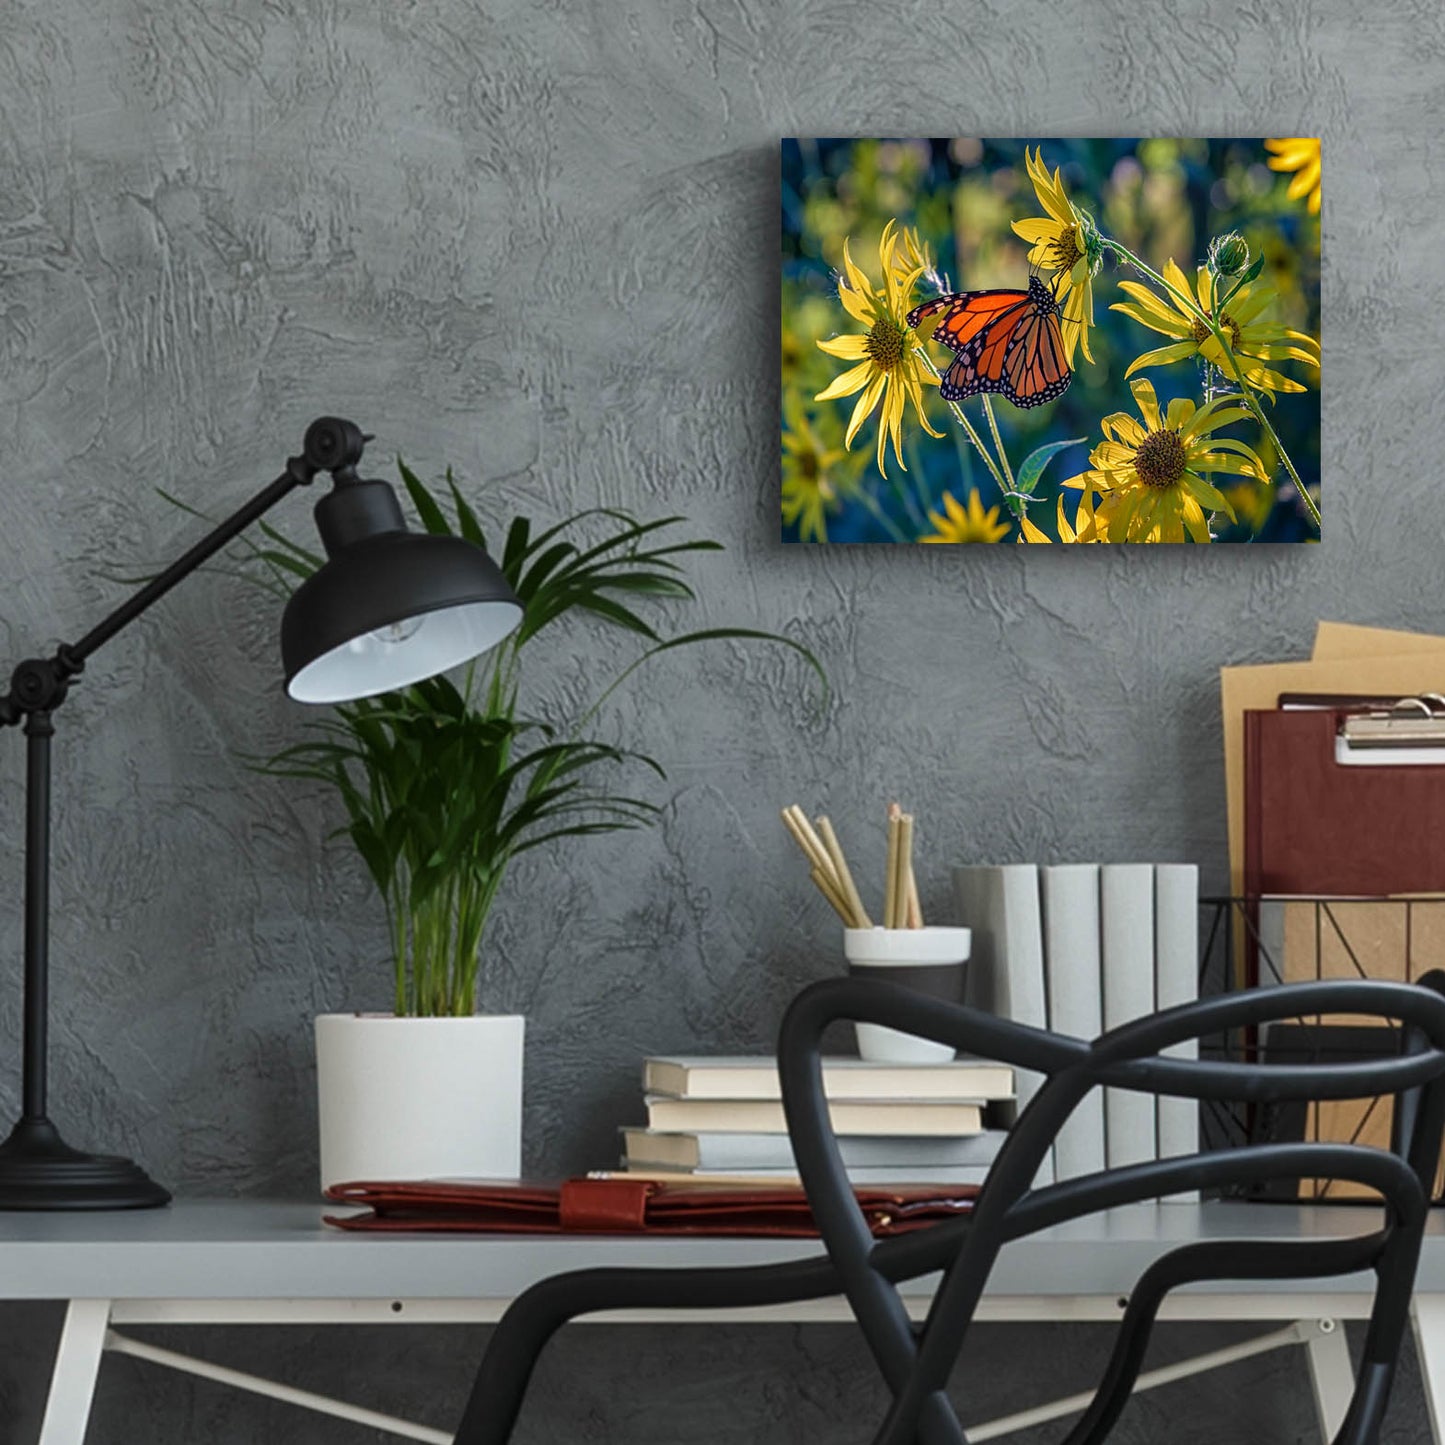 Epic Art 'The Monarch and the Sunflower' by Rick Berk, Acrylic Glass Wall Art,16x12